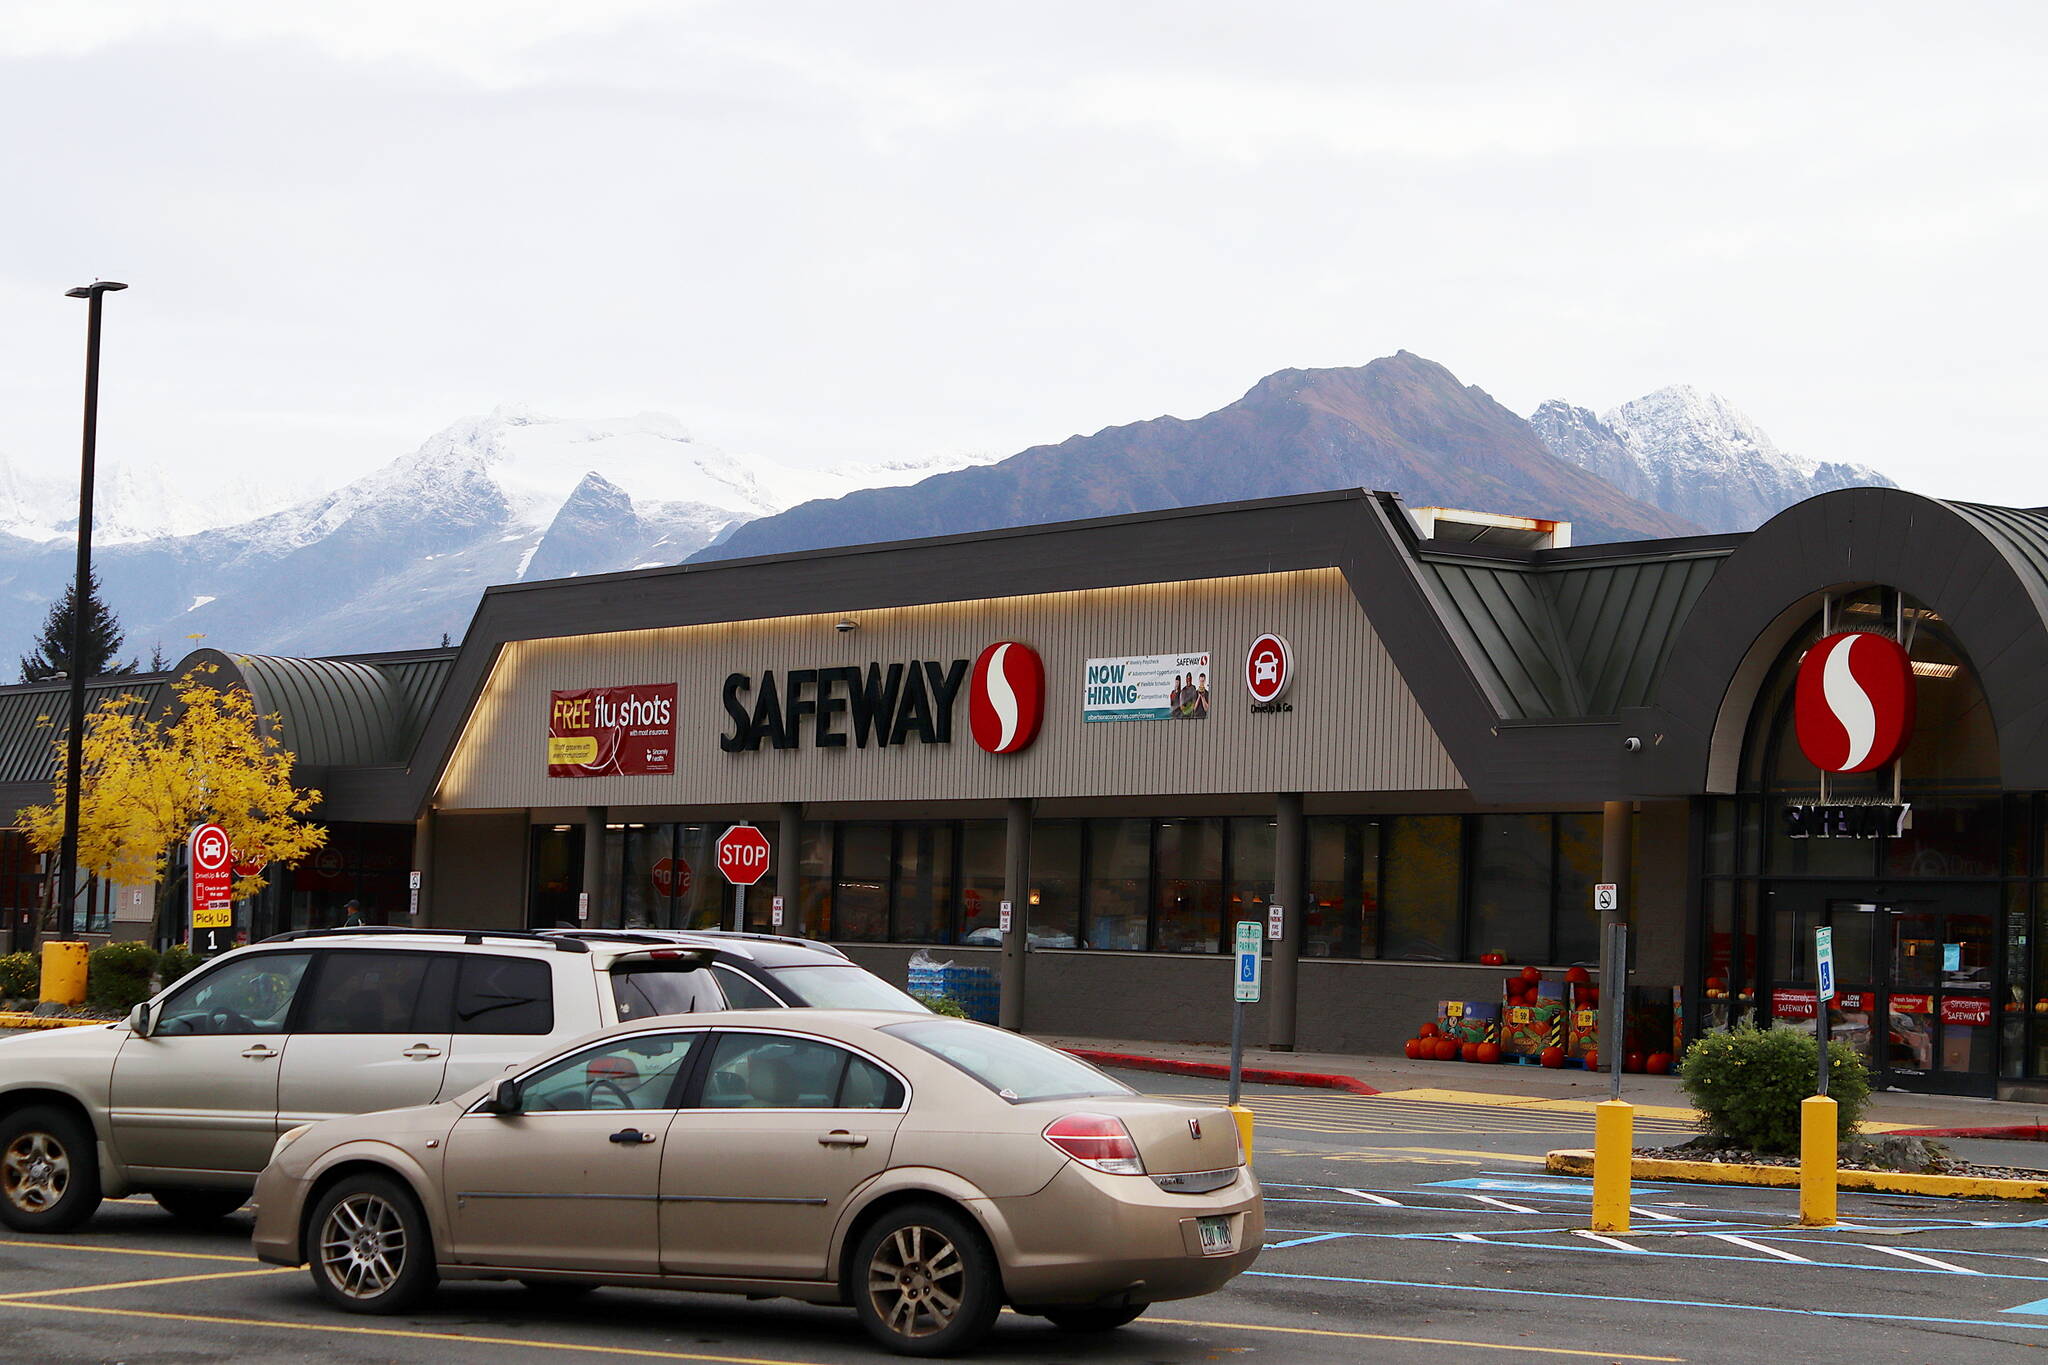 The Safeway supermarket in Juneau, seen here Wednesday, is among those in Alaska that might be sold if its parent company, Albertsons Companies Inc., merges with Kroger Co., the parent company of Fred Meyer. (Mark Sabbatini / Juneau Empire)